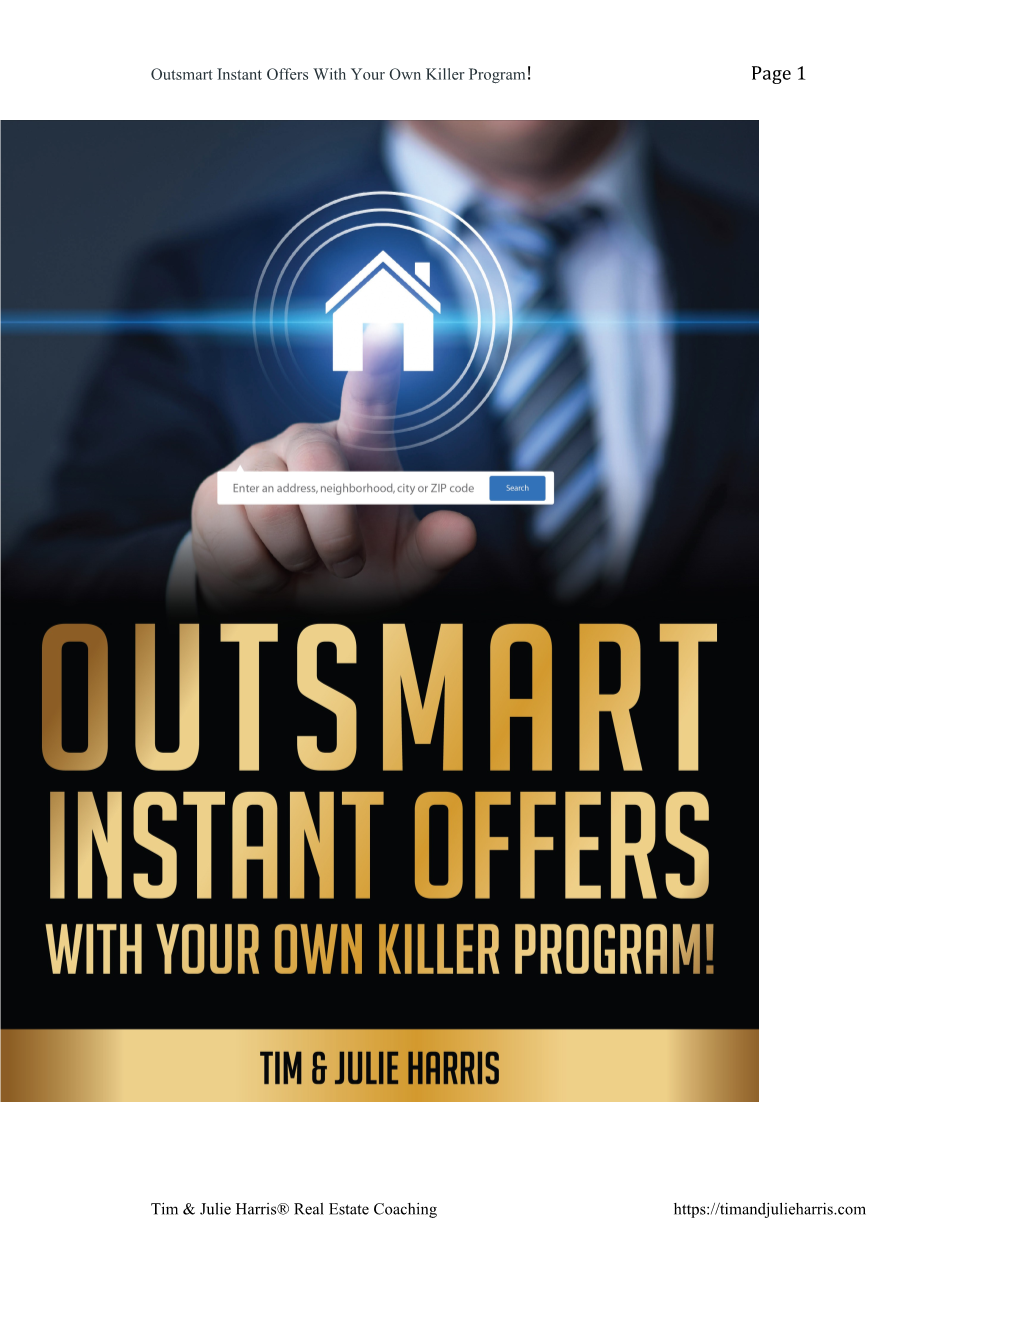 Outsmart Instant Offers with Your Own Killer Program!